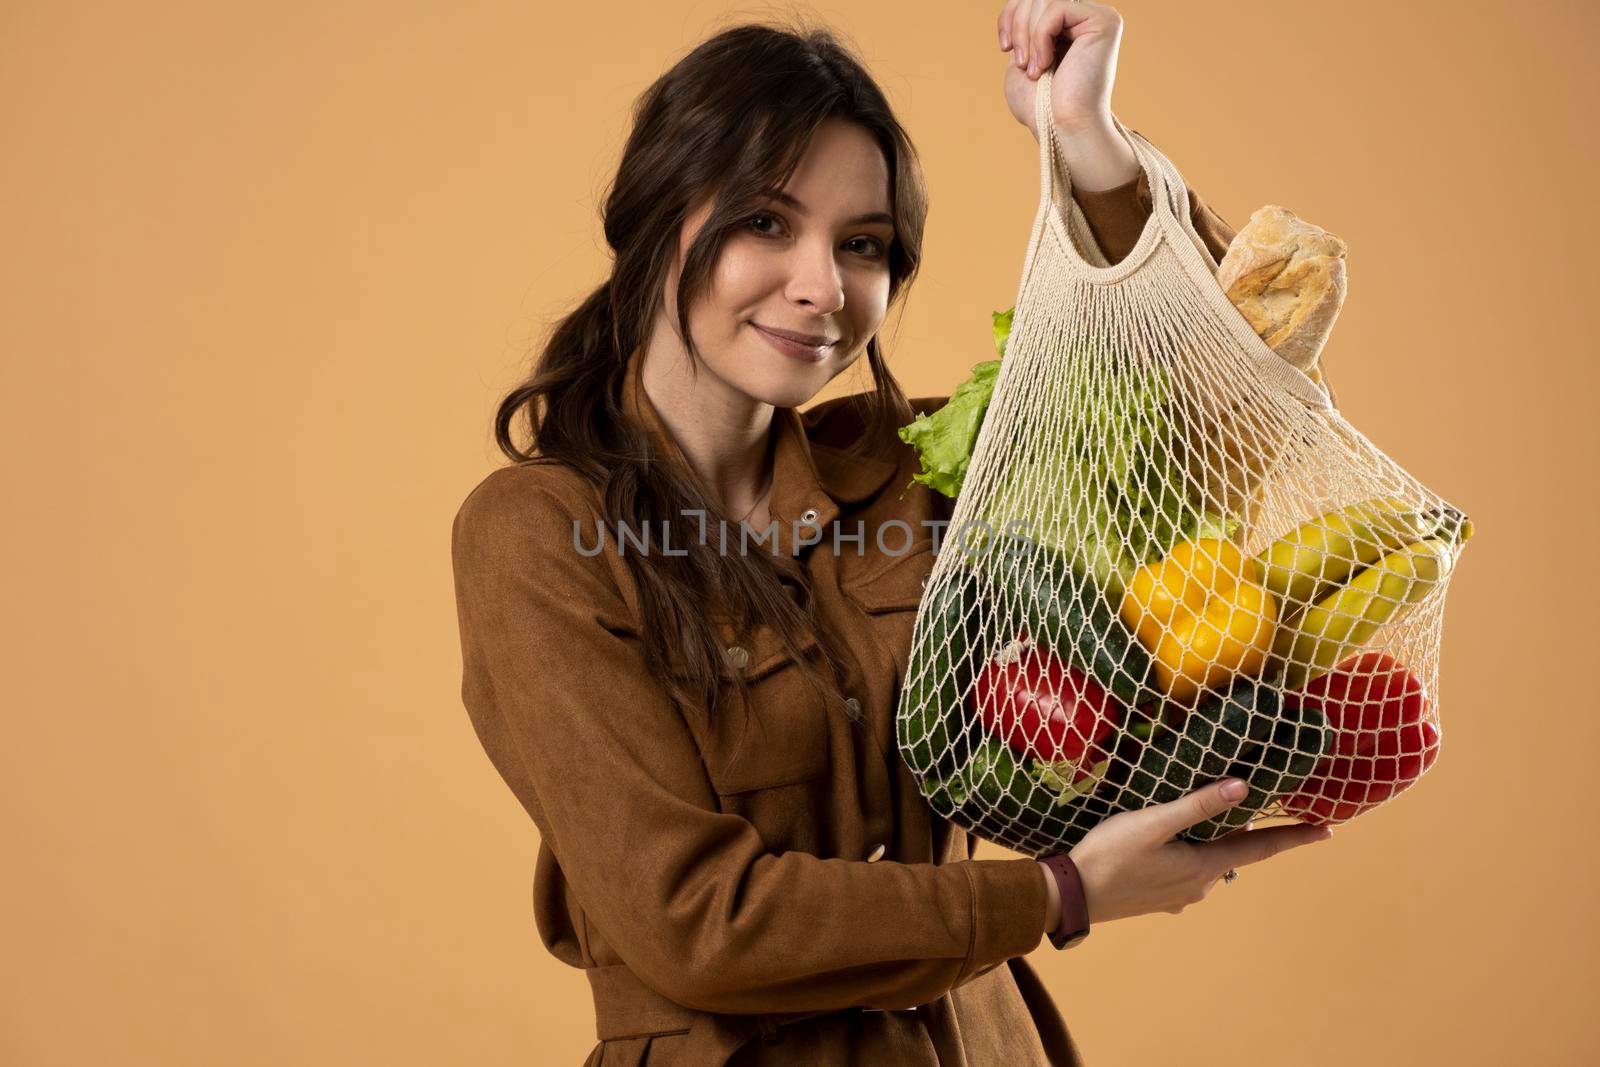 Portrait of happy smiling young woman in brown dress holding reusable string bag with groceries over orange background. Sustainability, eco living and people concept. by vovsht